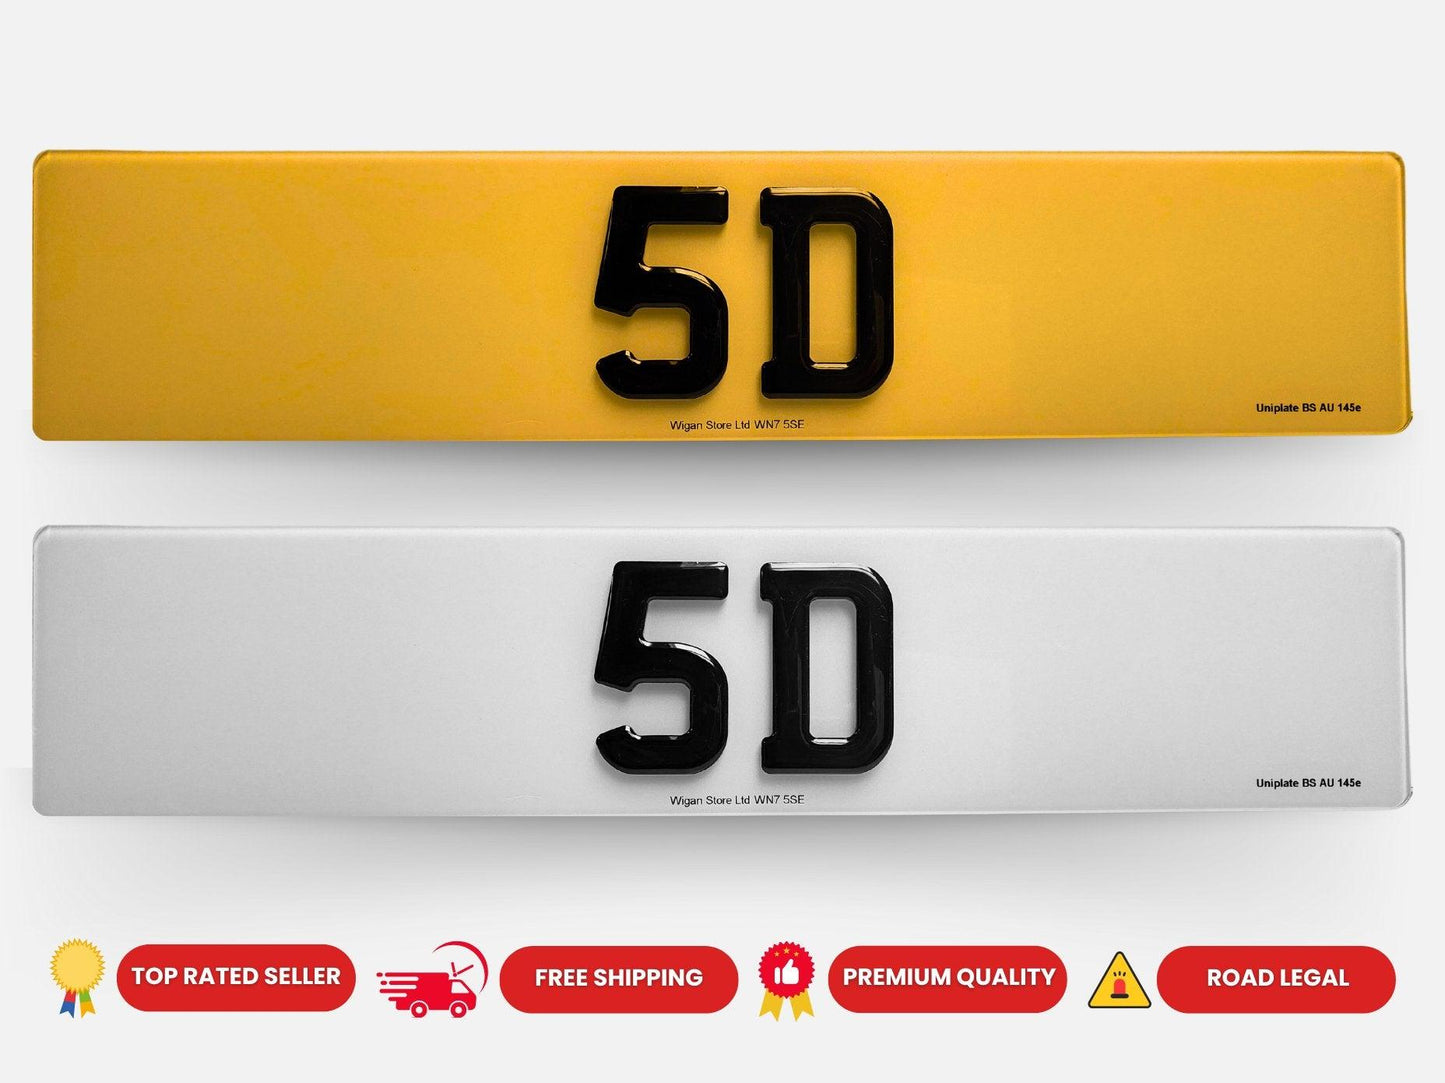 5d road legal number plate 4d gel number plate 7mm gel number plate for car van trailer in LEigh, bolton, atherton, wigan delivery all over UK